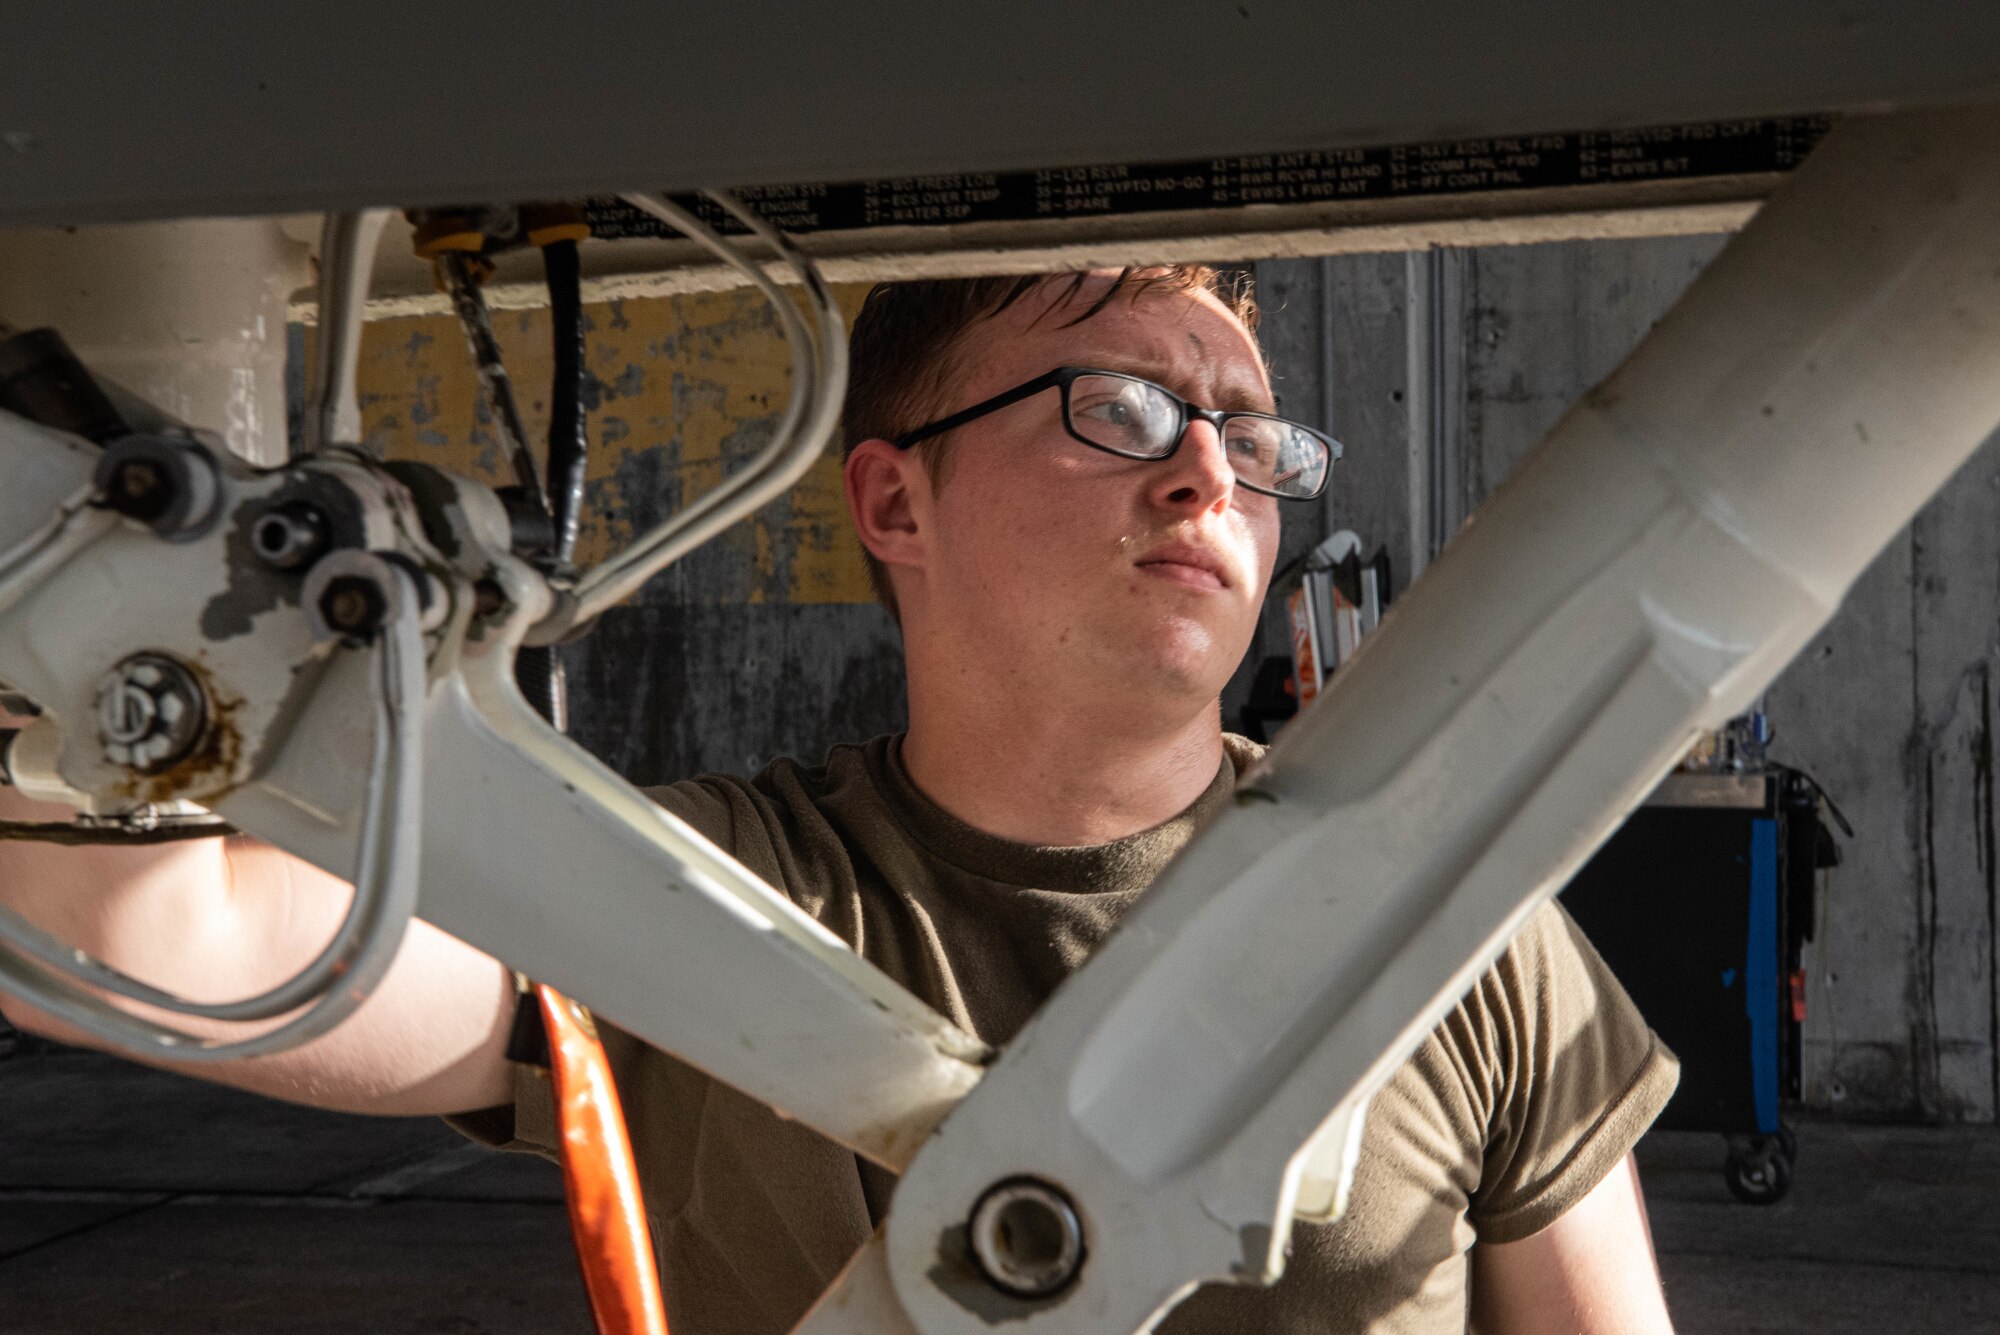 An Airman from the 44th AMU inspects the ASP on an F-15C Eagle.